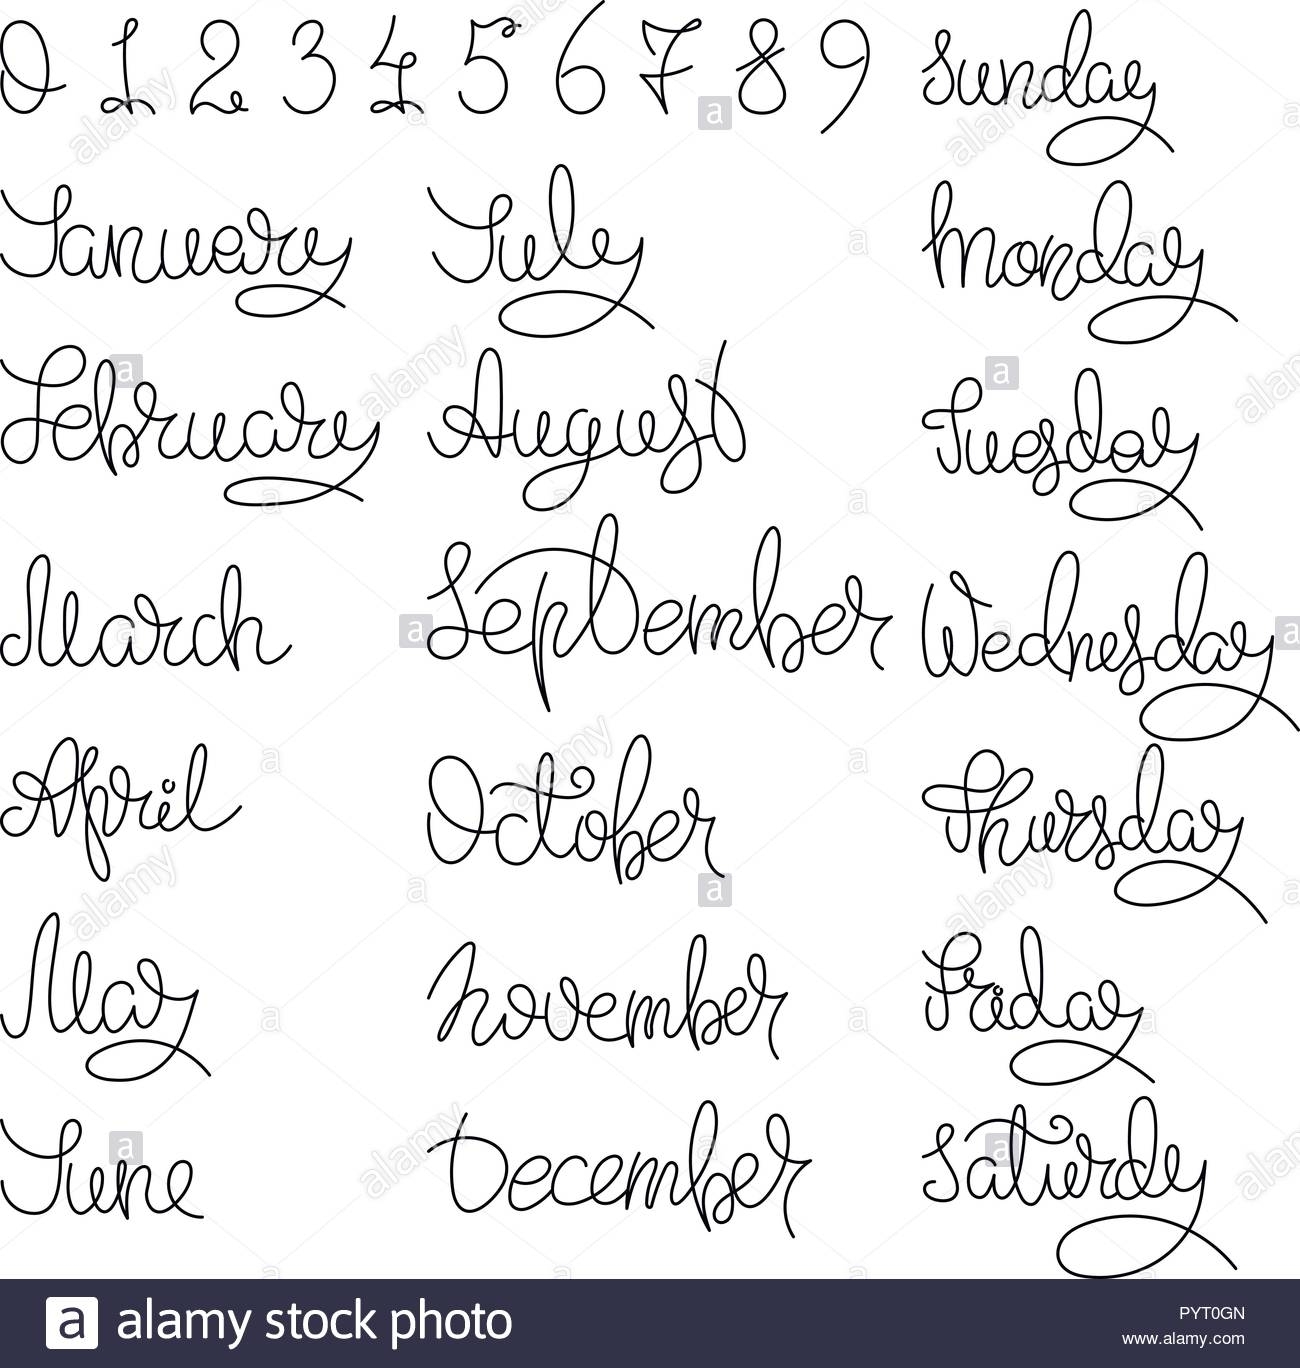 Calendar Collection Of Months And Numbers For All Year, Week pertaining to Calendar With The Months Number